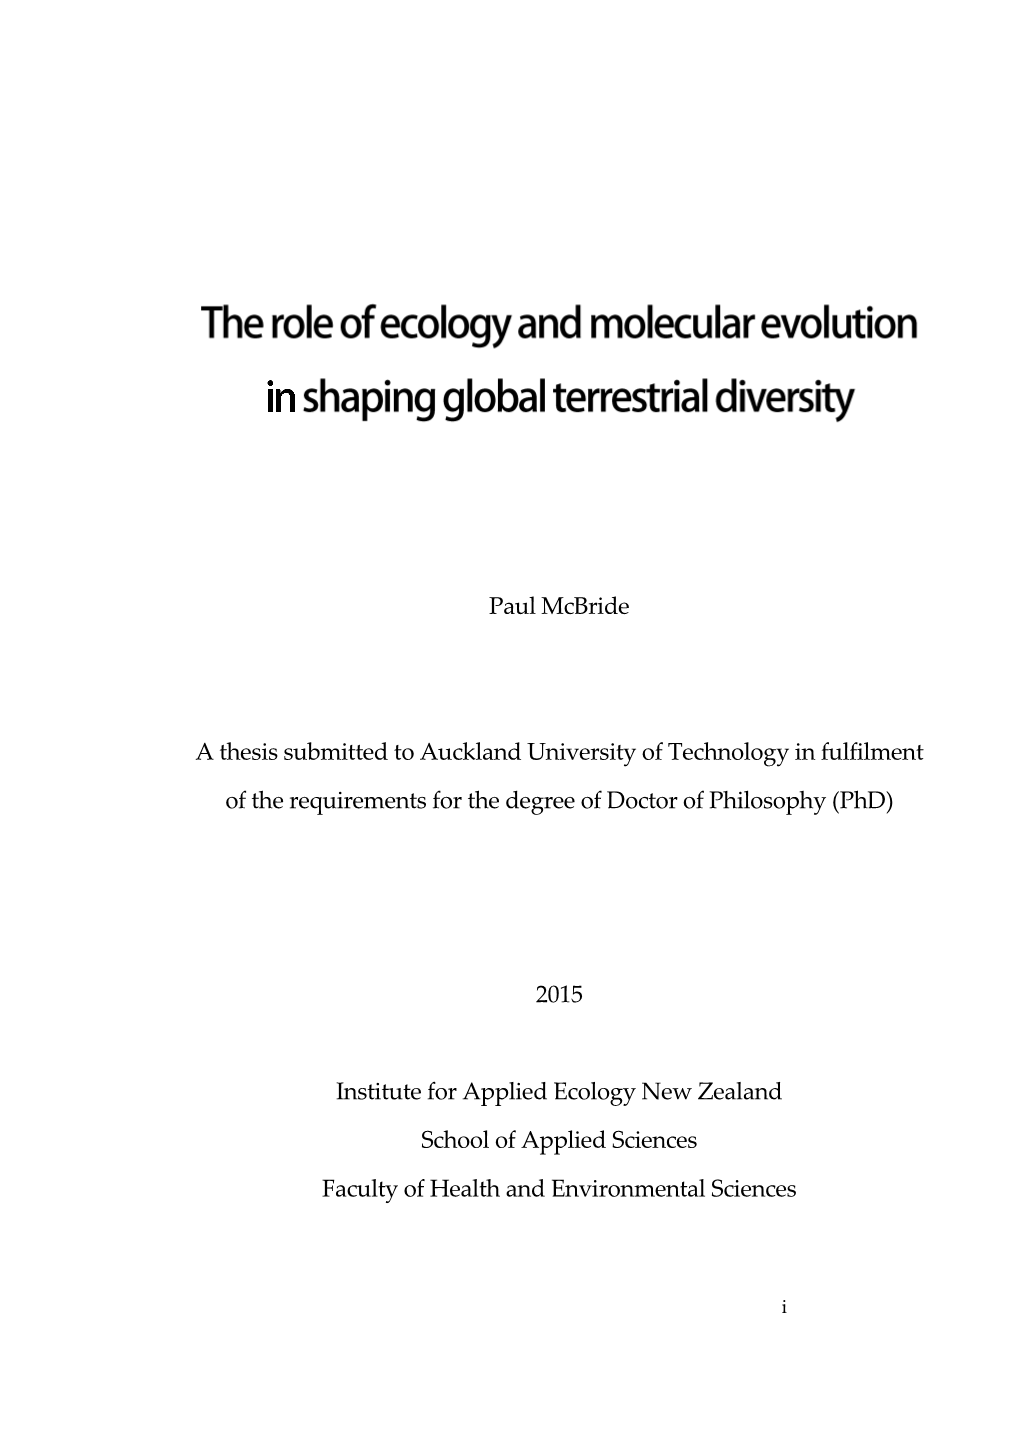 Paul Mcbride a Thesis Submitted to Auckland University of Technology